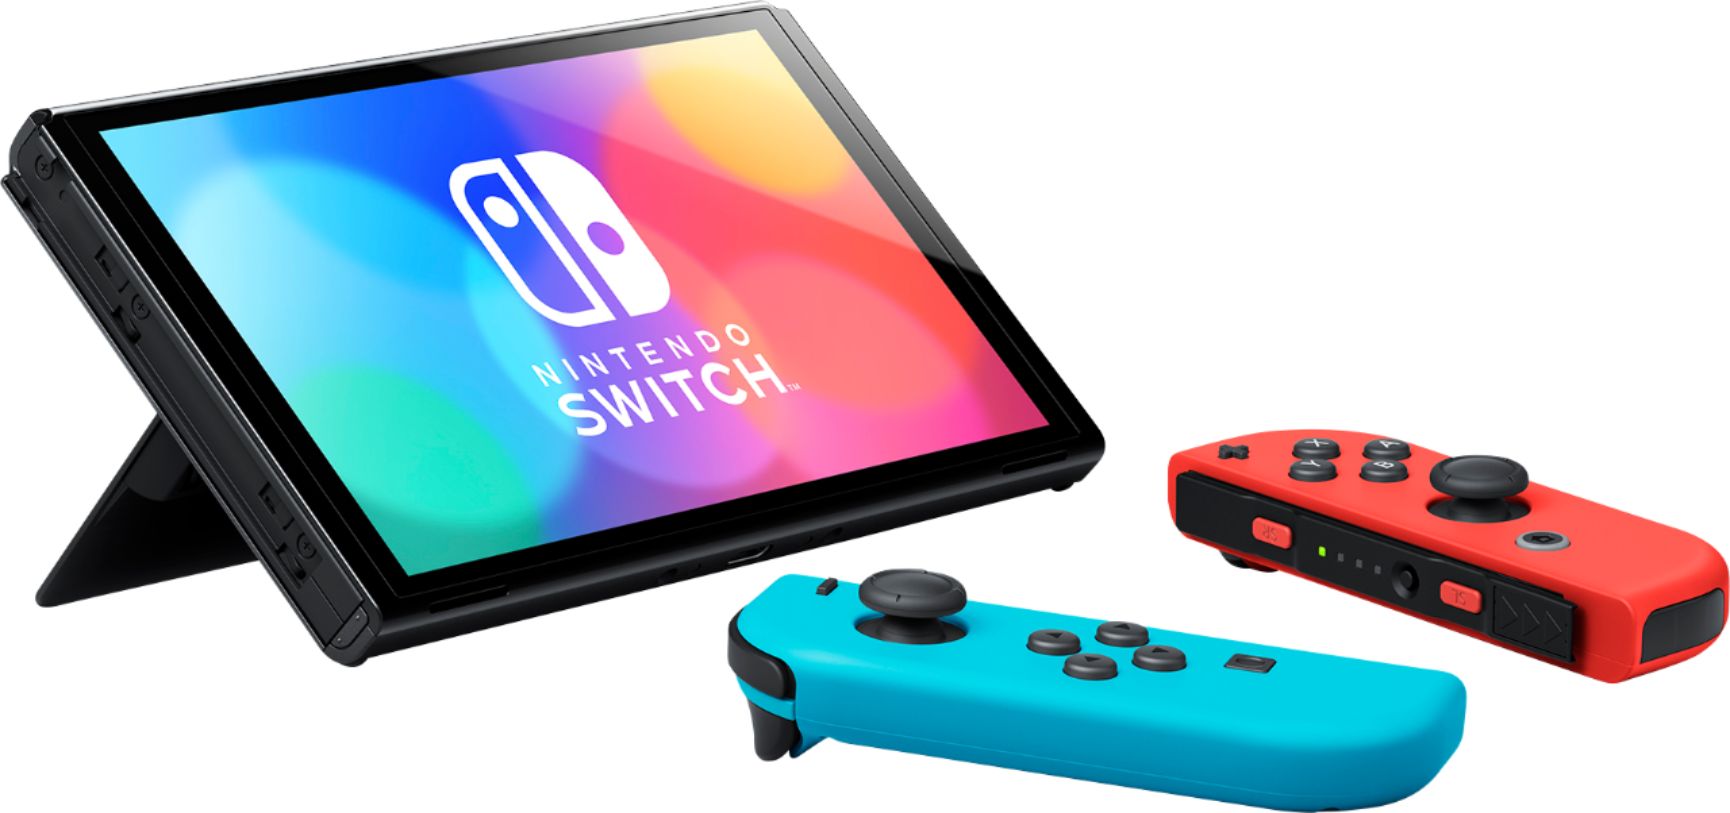 2022 New Nintendo Switch OLED Model Neon Red Blue Joy Con 64GB Console Improved HD Screen & LAN-Port Dock with Triangle Strategy, Mytrix Full Body Skin Sticker - Sakura Pink